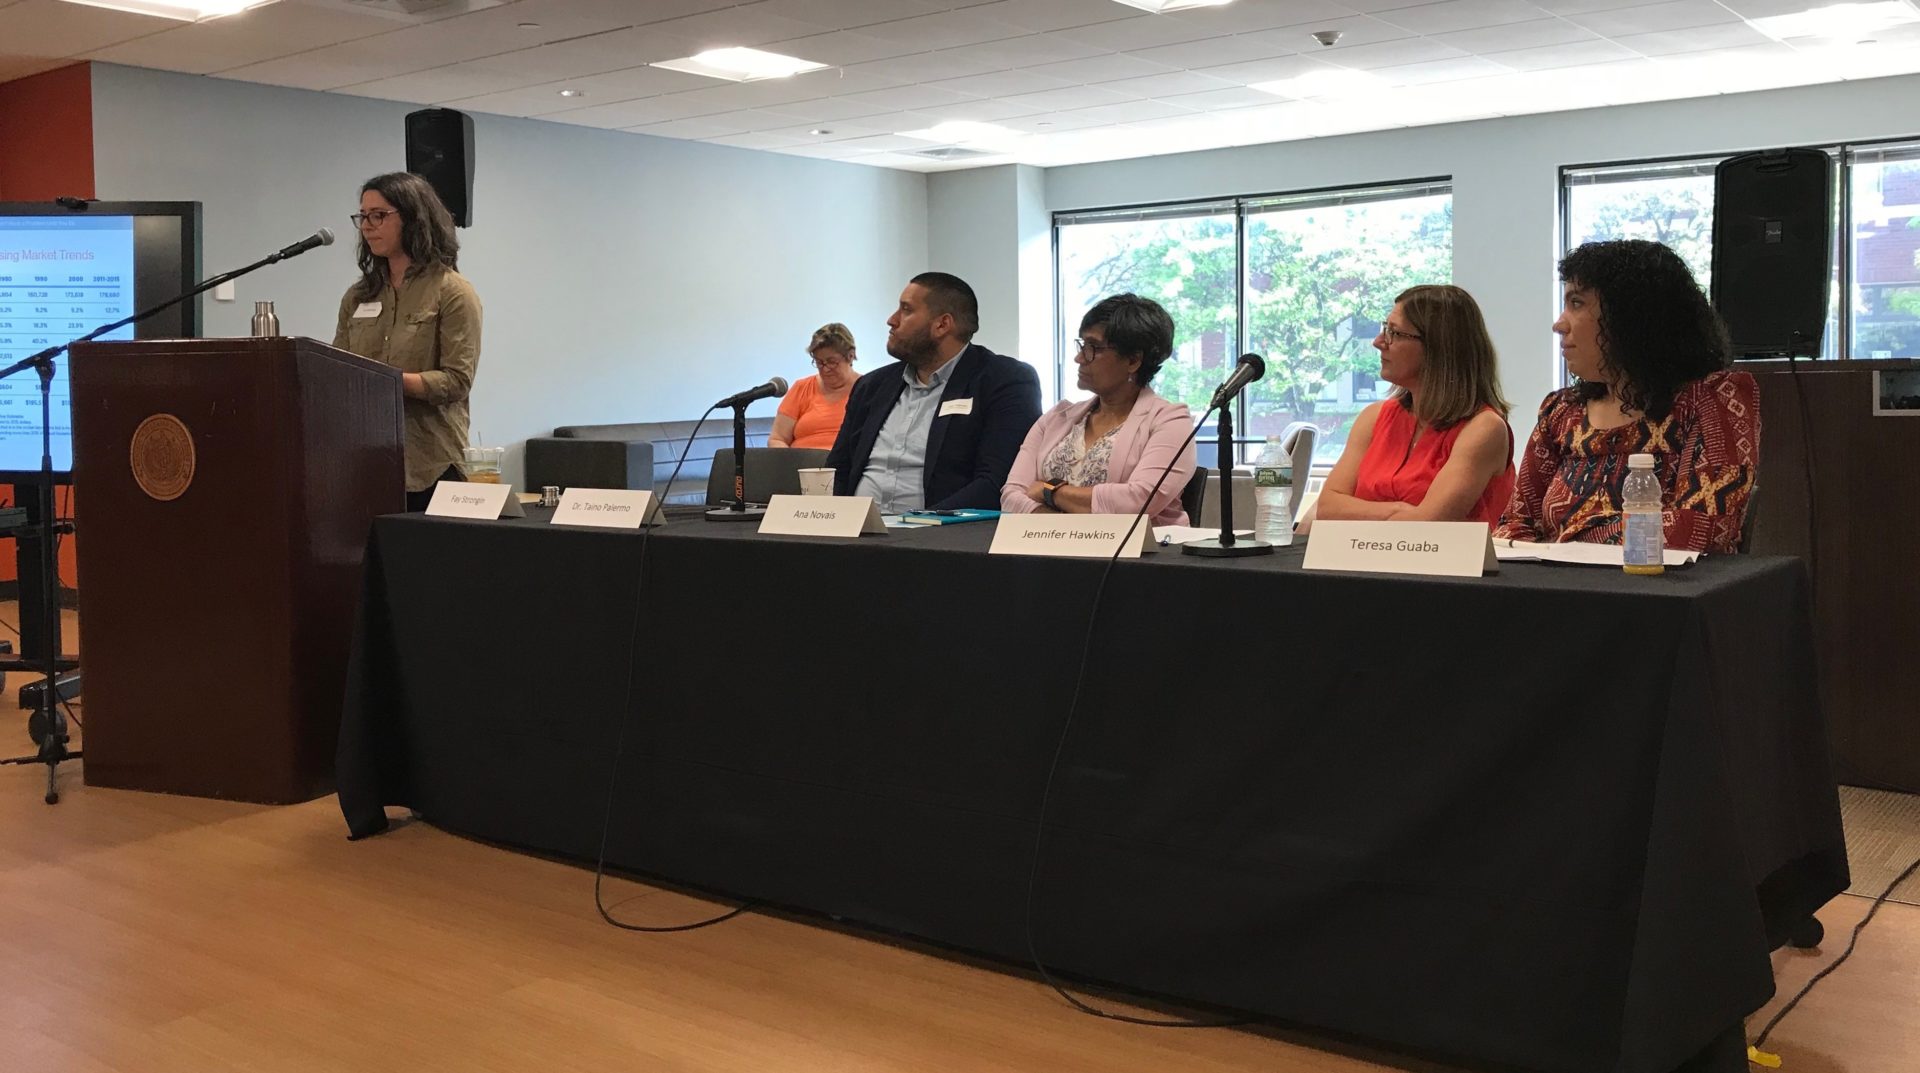 Executive Director Participates in Forum on Revitalization and Gentrification in Providence